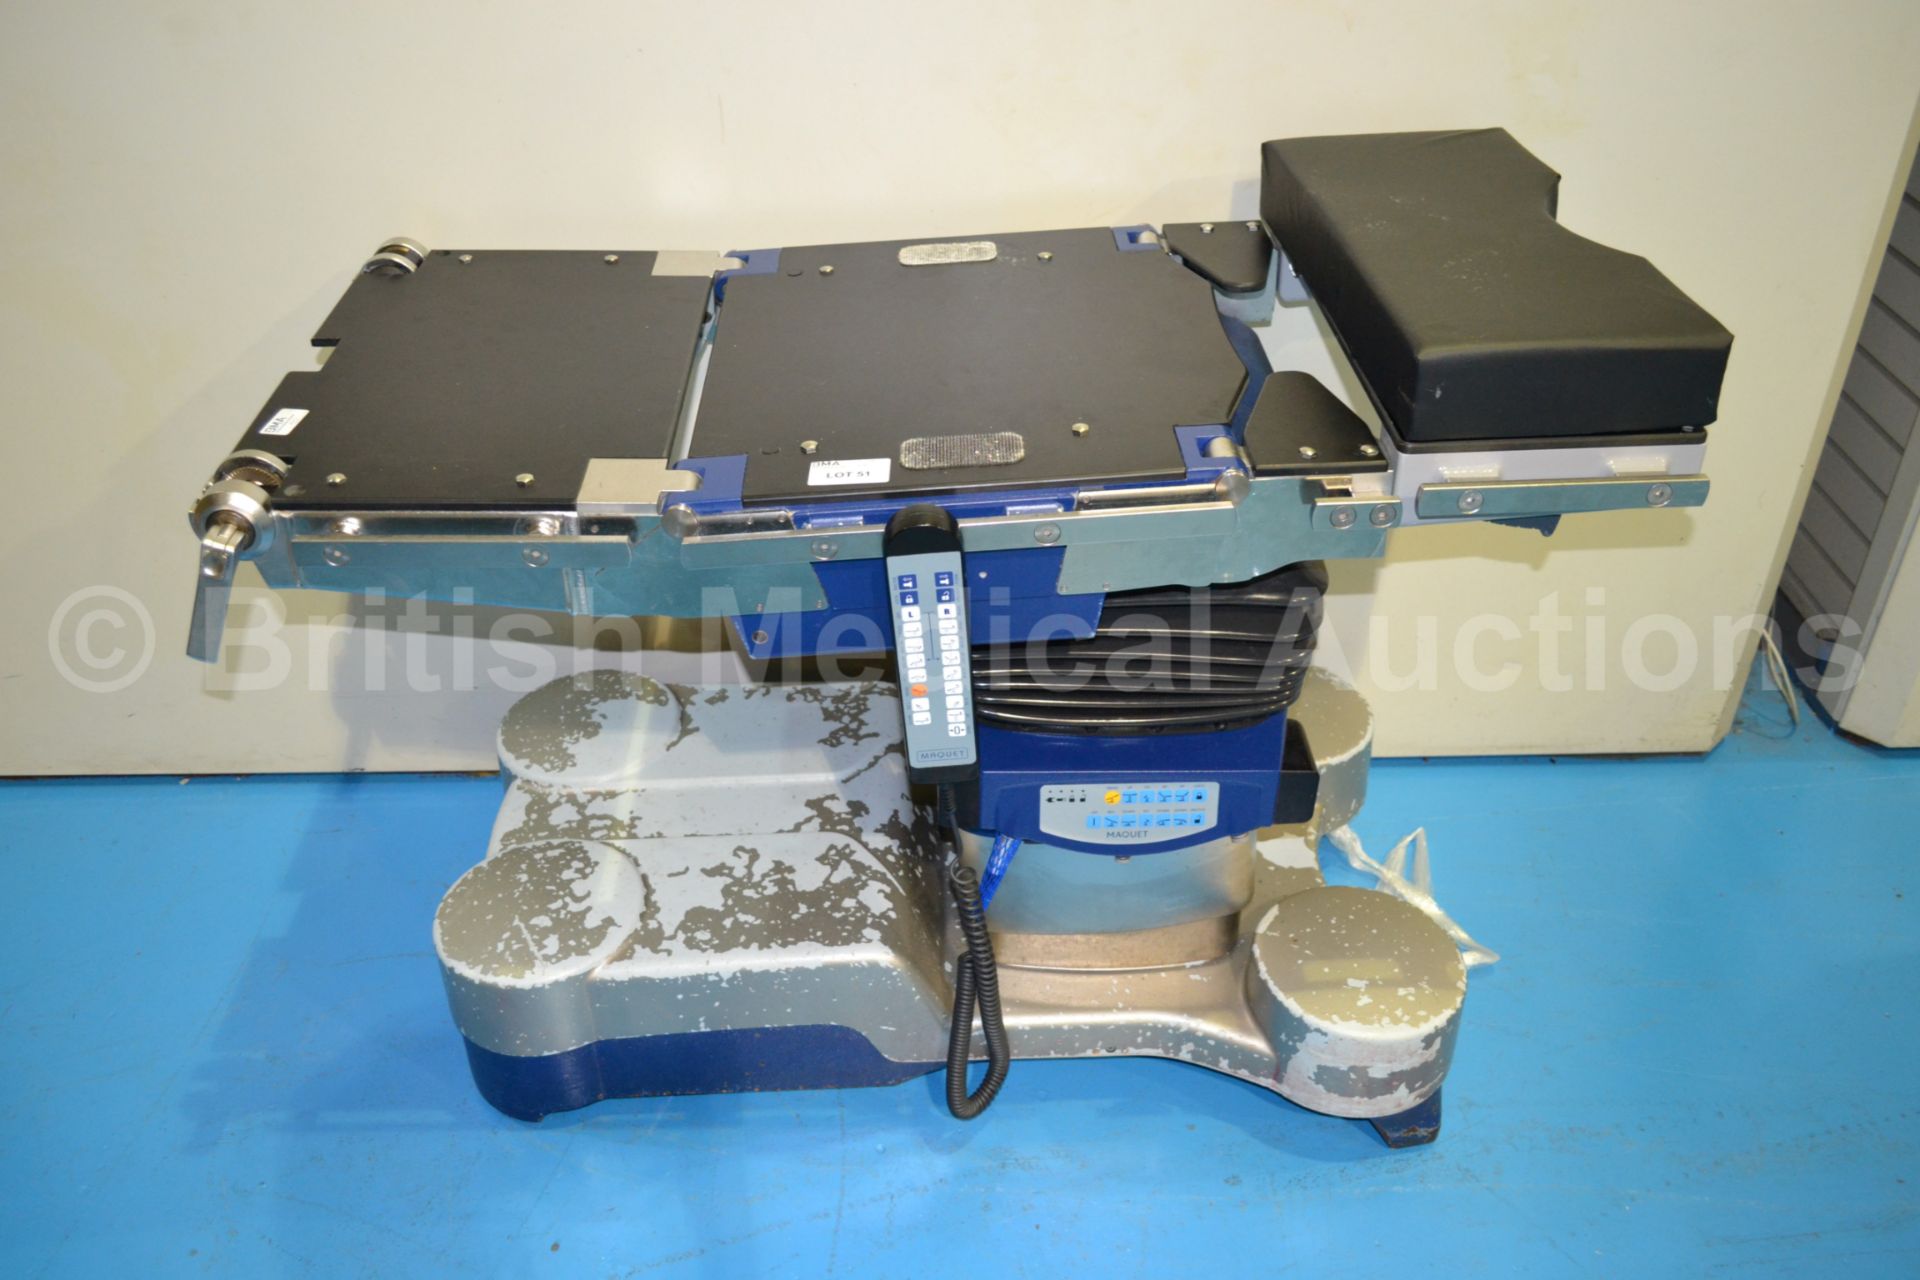 Maquet Operating Table with Controller - Incomplet